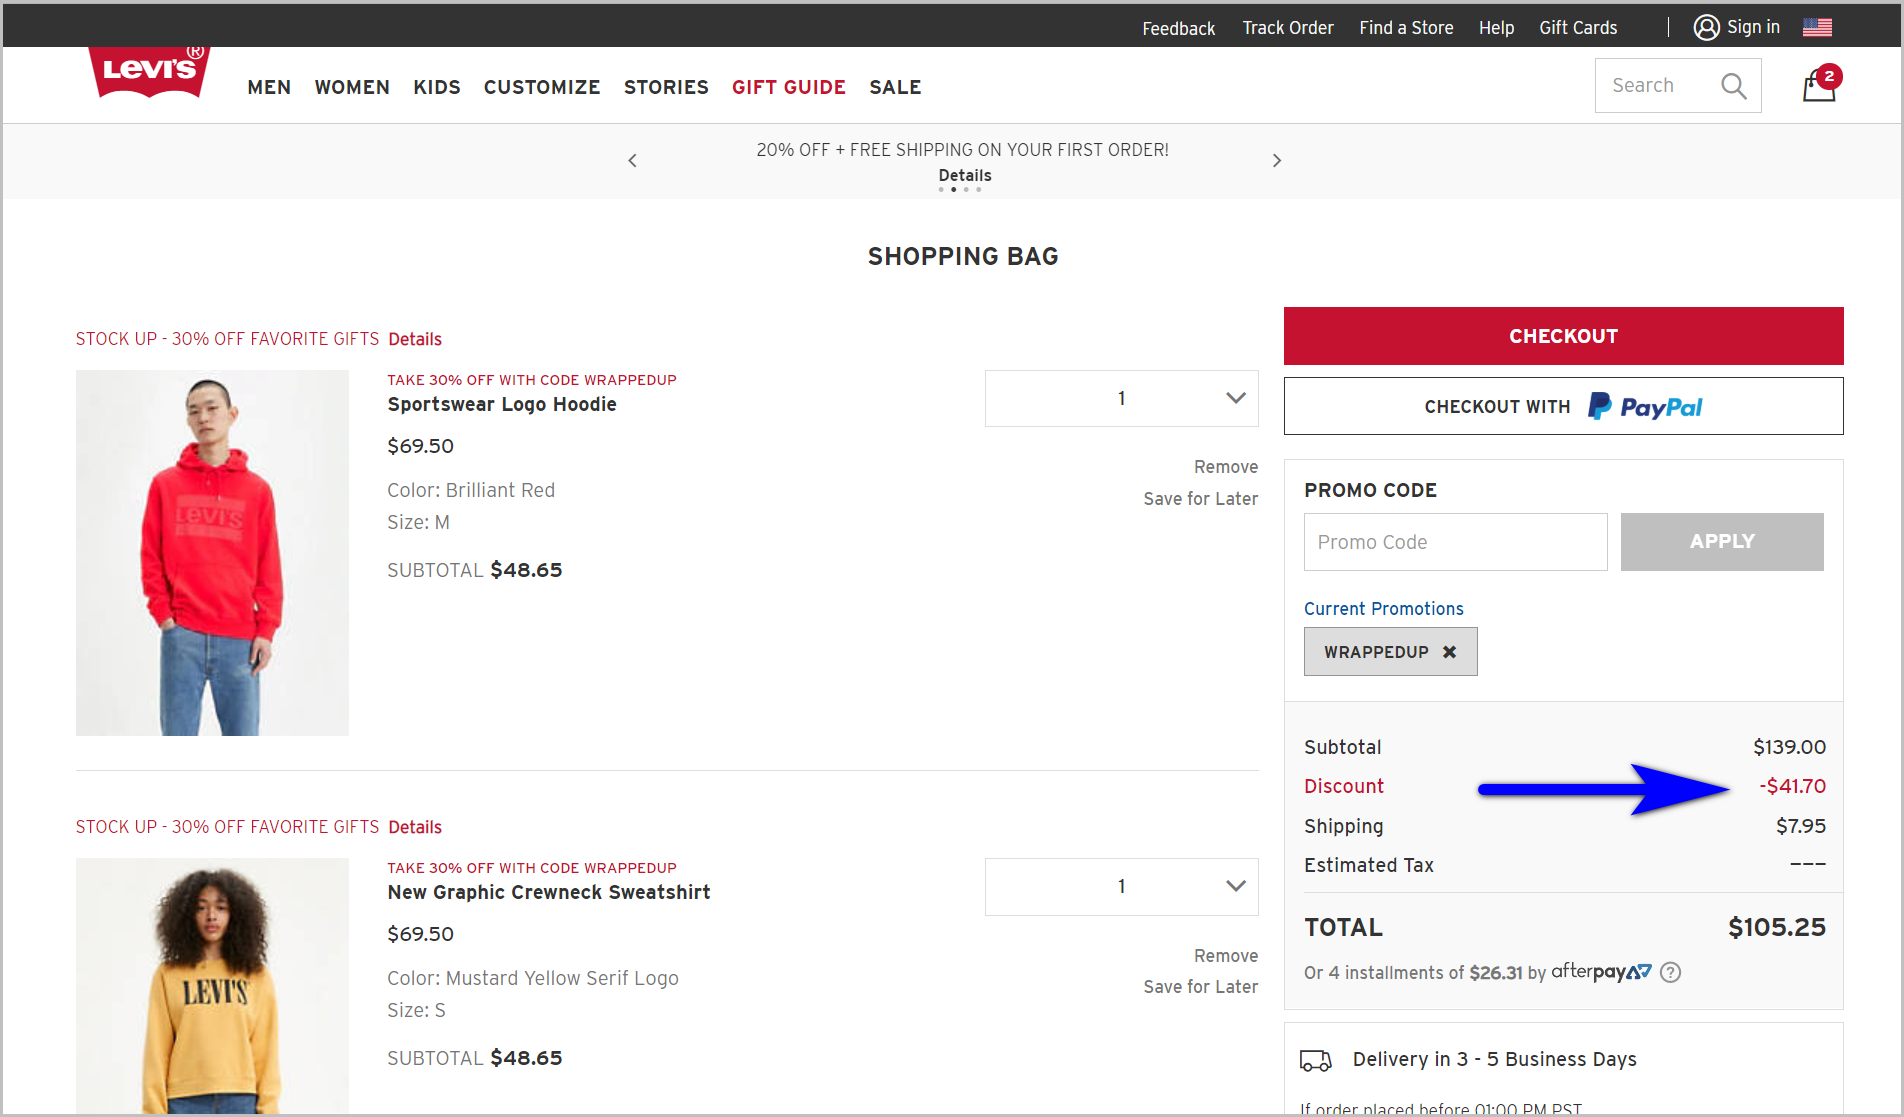 discount pricing strategies - making the effect of the discount immediately obvious example - levi.com shopping cart page with the total amount saved shown in red in the order total section